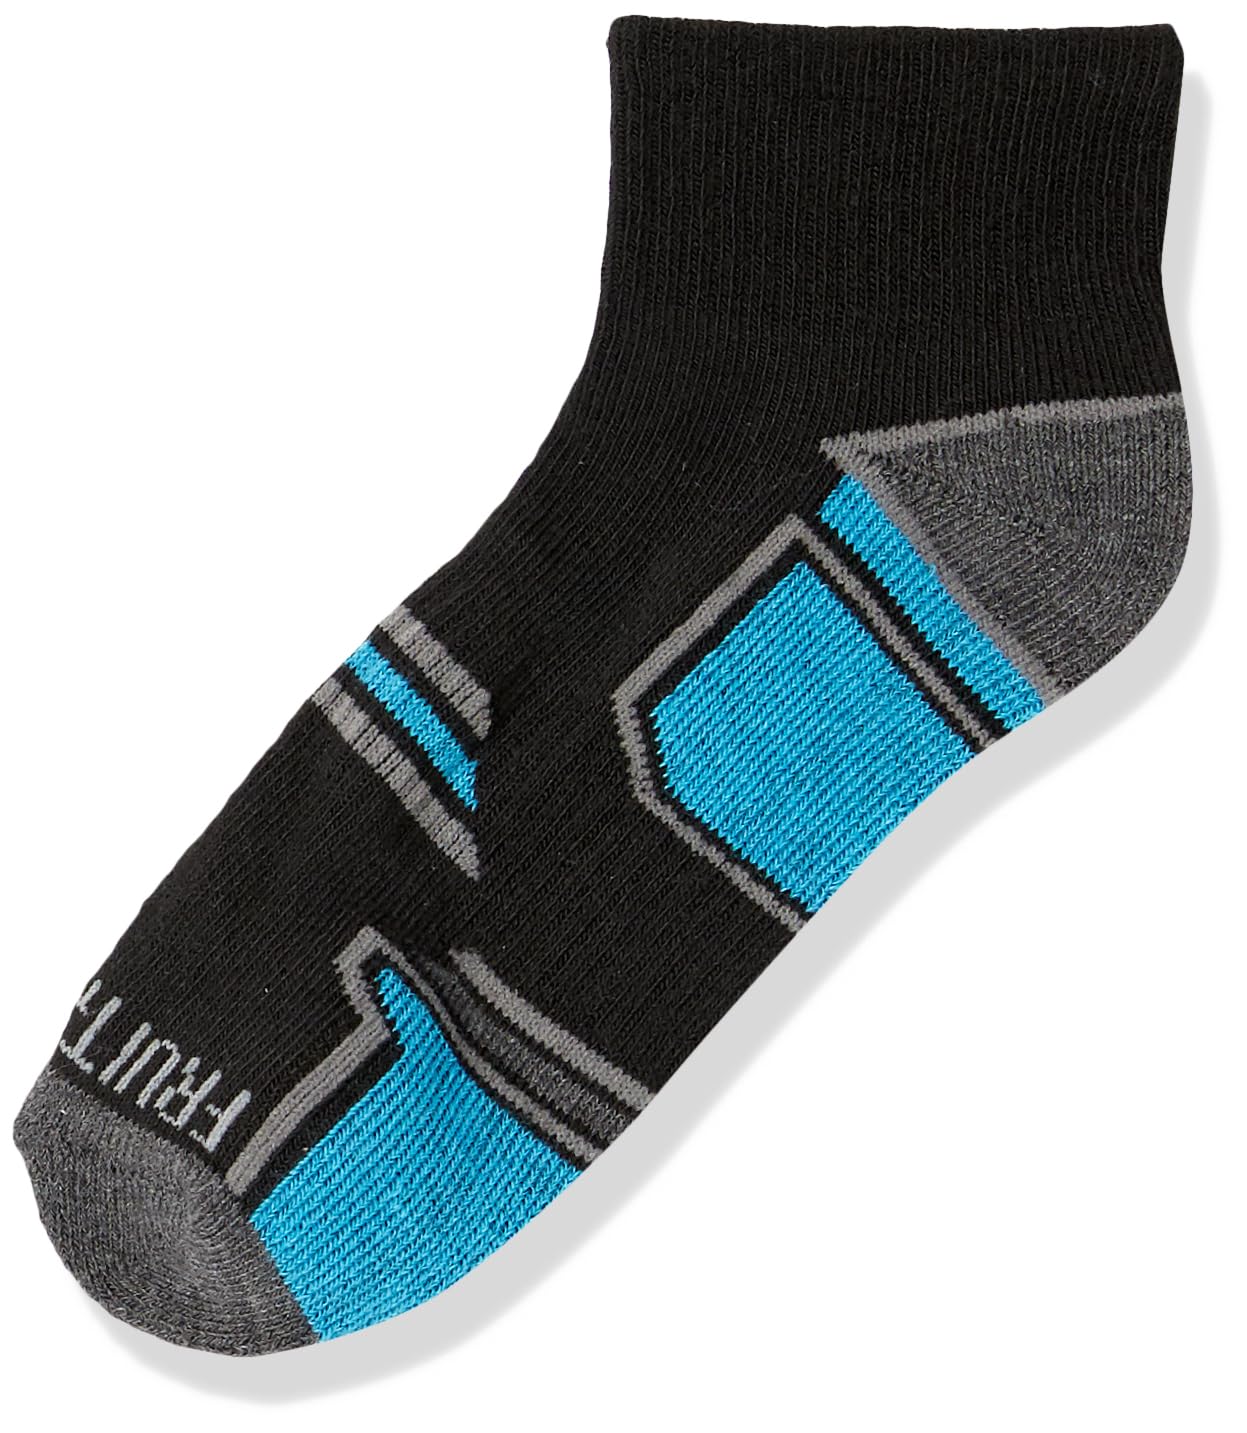 Fruit of the Loom Boys' Everyday Active Ankle Socks (12 Pack)